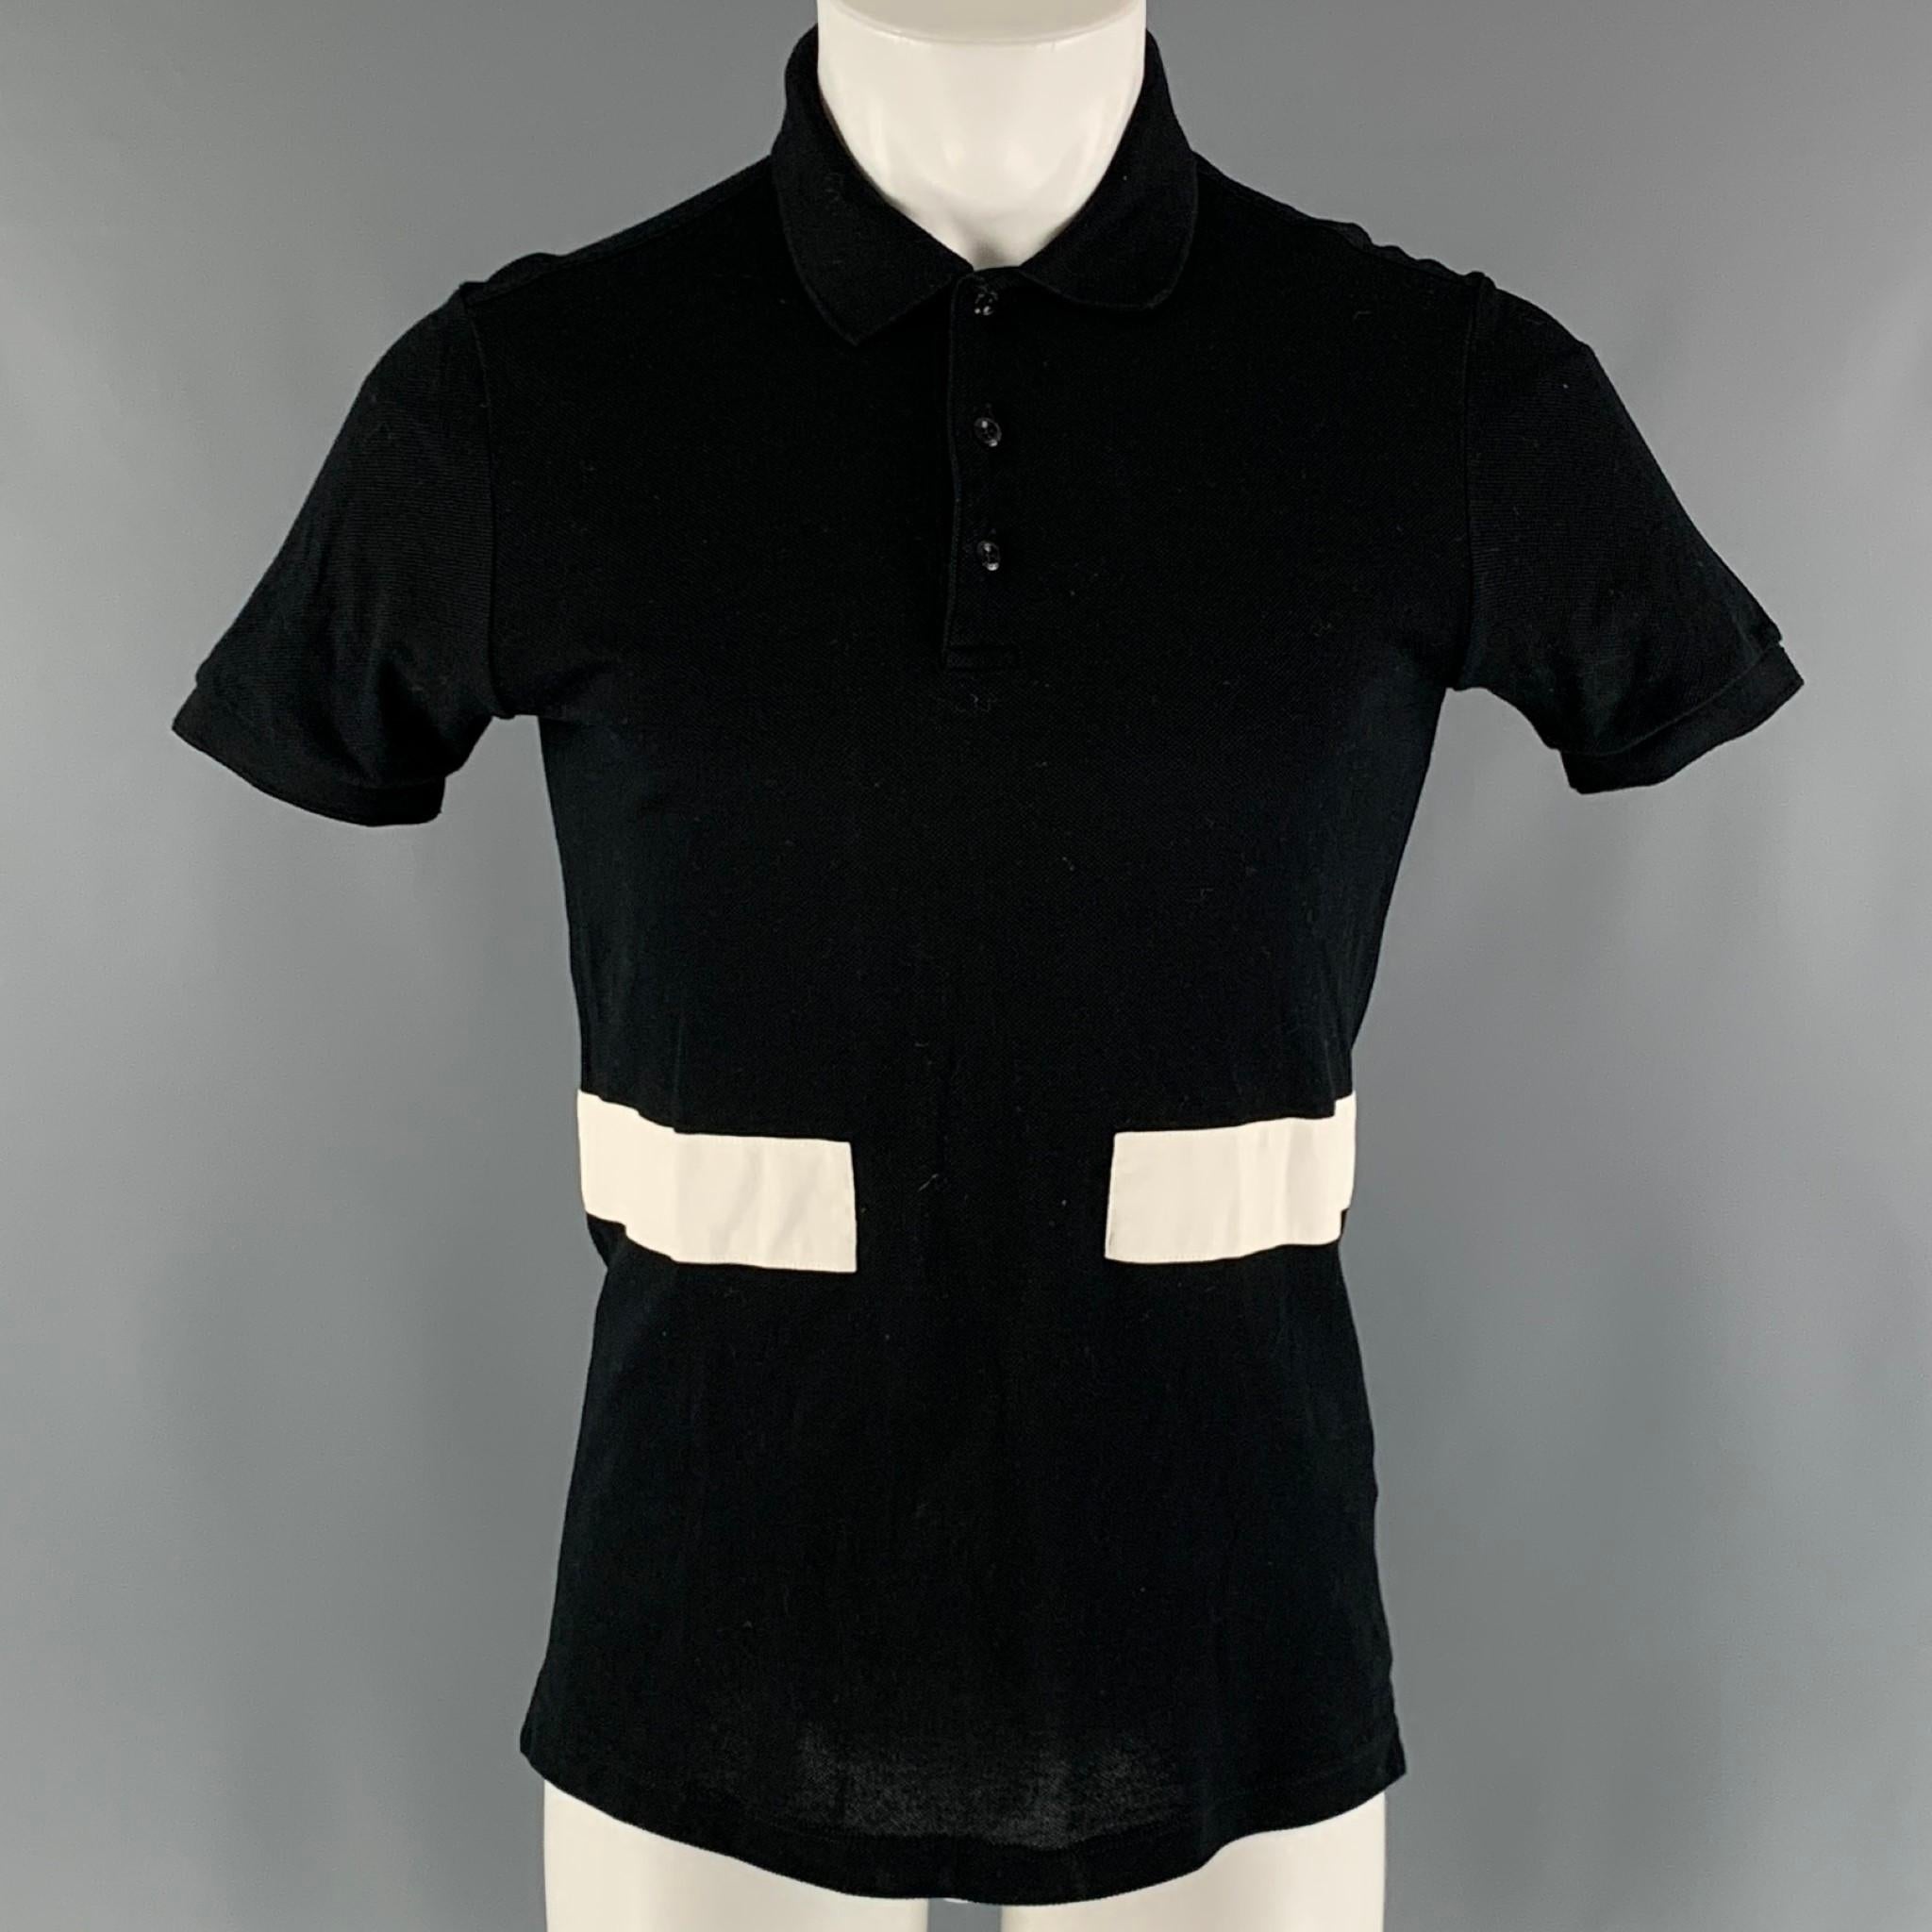 GIVENCHY polo comes in a black cotton piquet material featuring a spread collar, white wide stripes, and a half buttoned closure.

Excellent Pre-Owned Condition.
Marked: XS

Measurements:

Shoulder: 17 in.
Chest: 38 in.
Sleeve: 8 in.
Length: 28 in. 